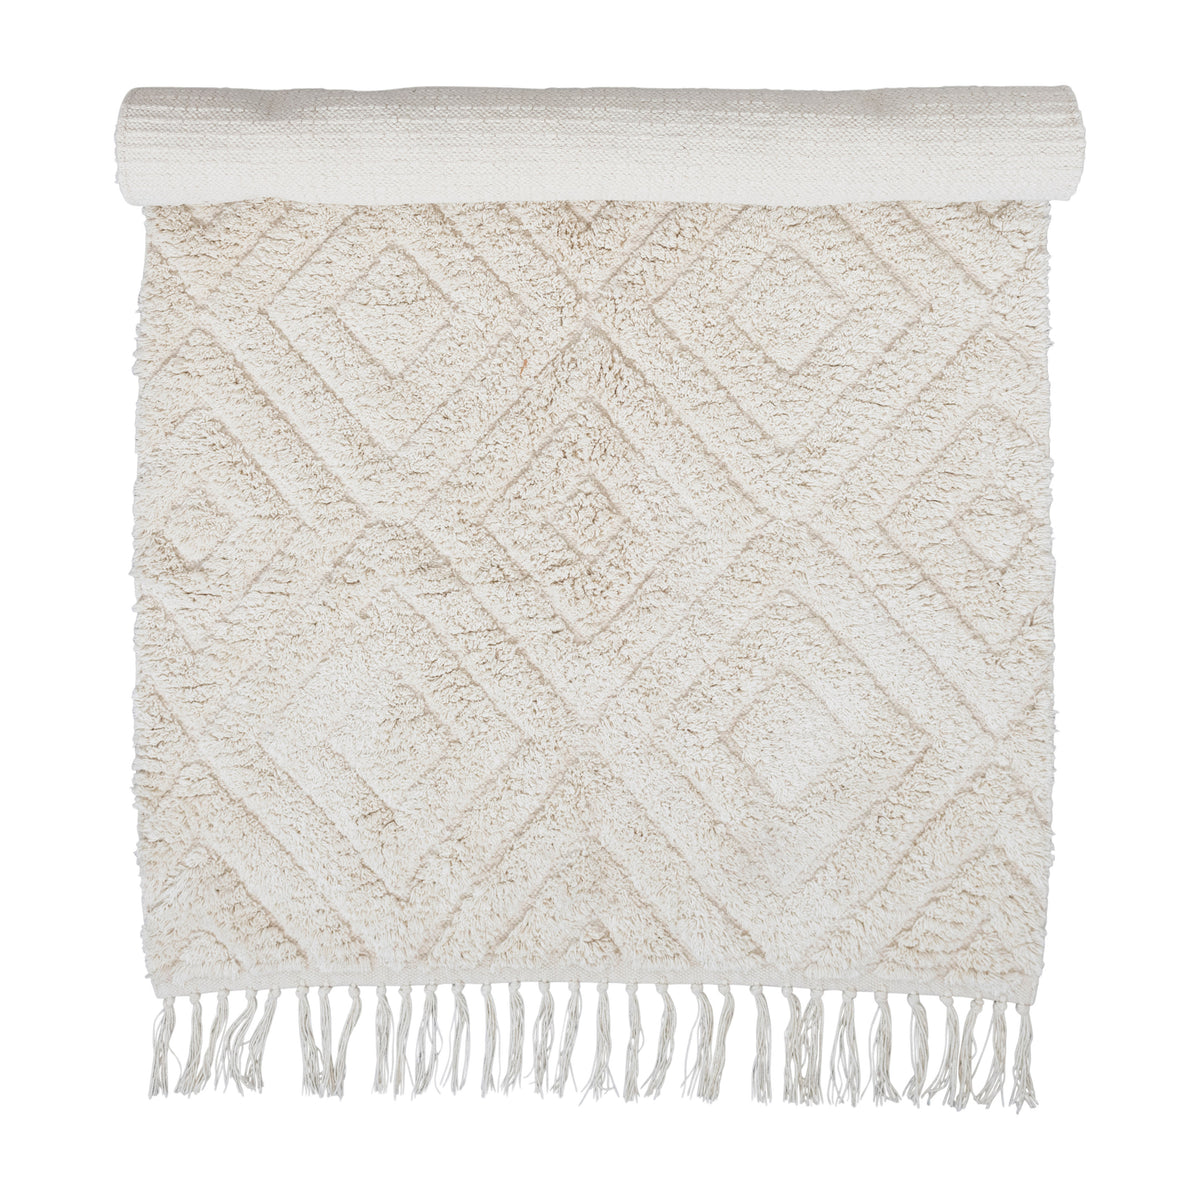 Cotton Tufted Rug with Diamond Pattern and Fringe